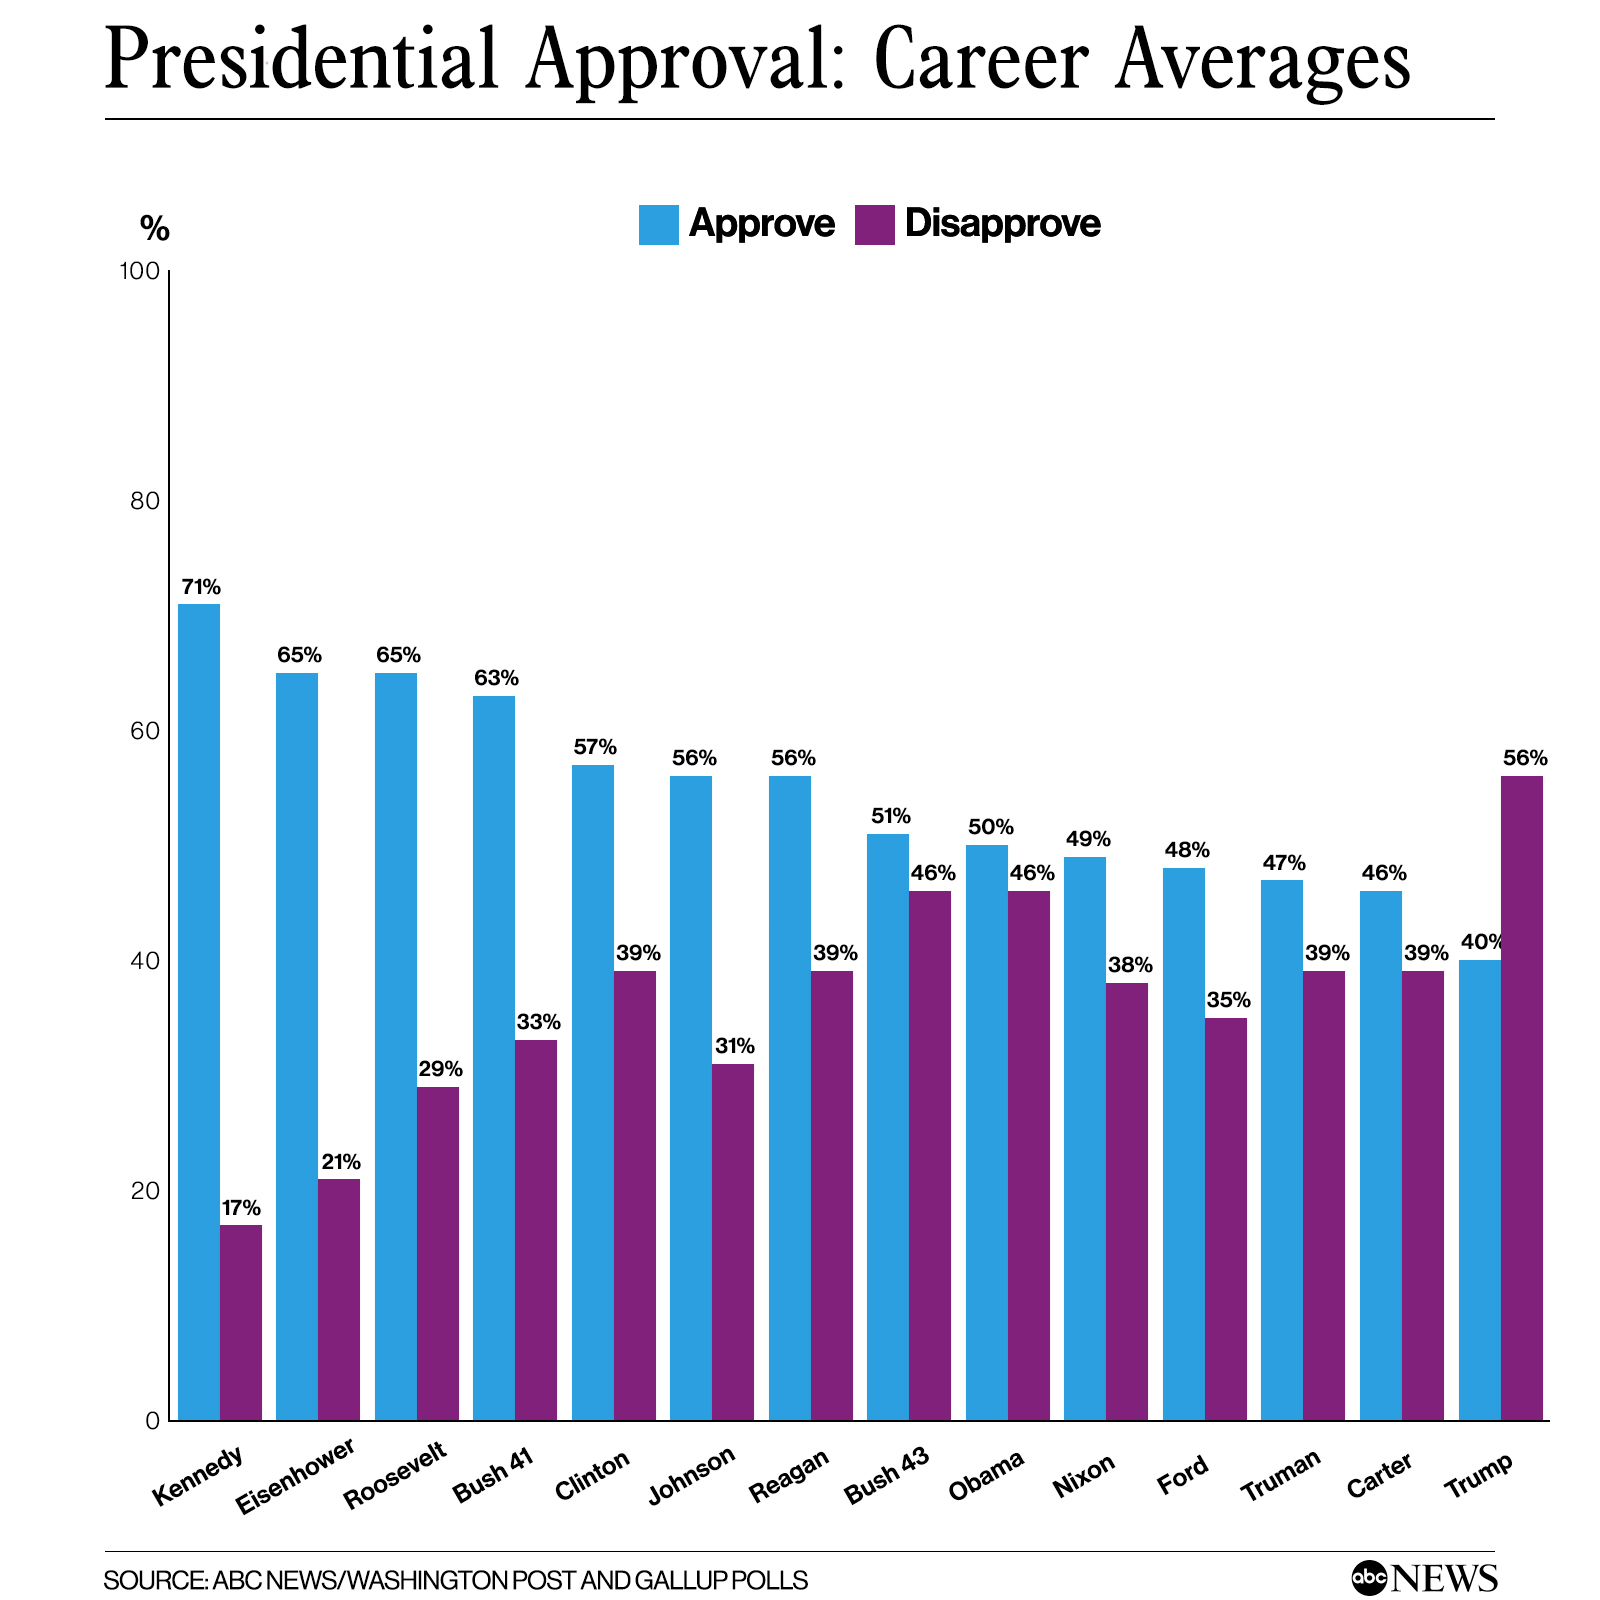 Presidential approval rate from Roosevelt to Trump from ACB News